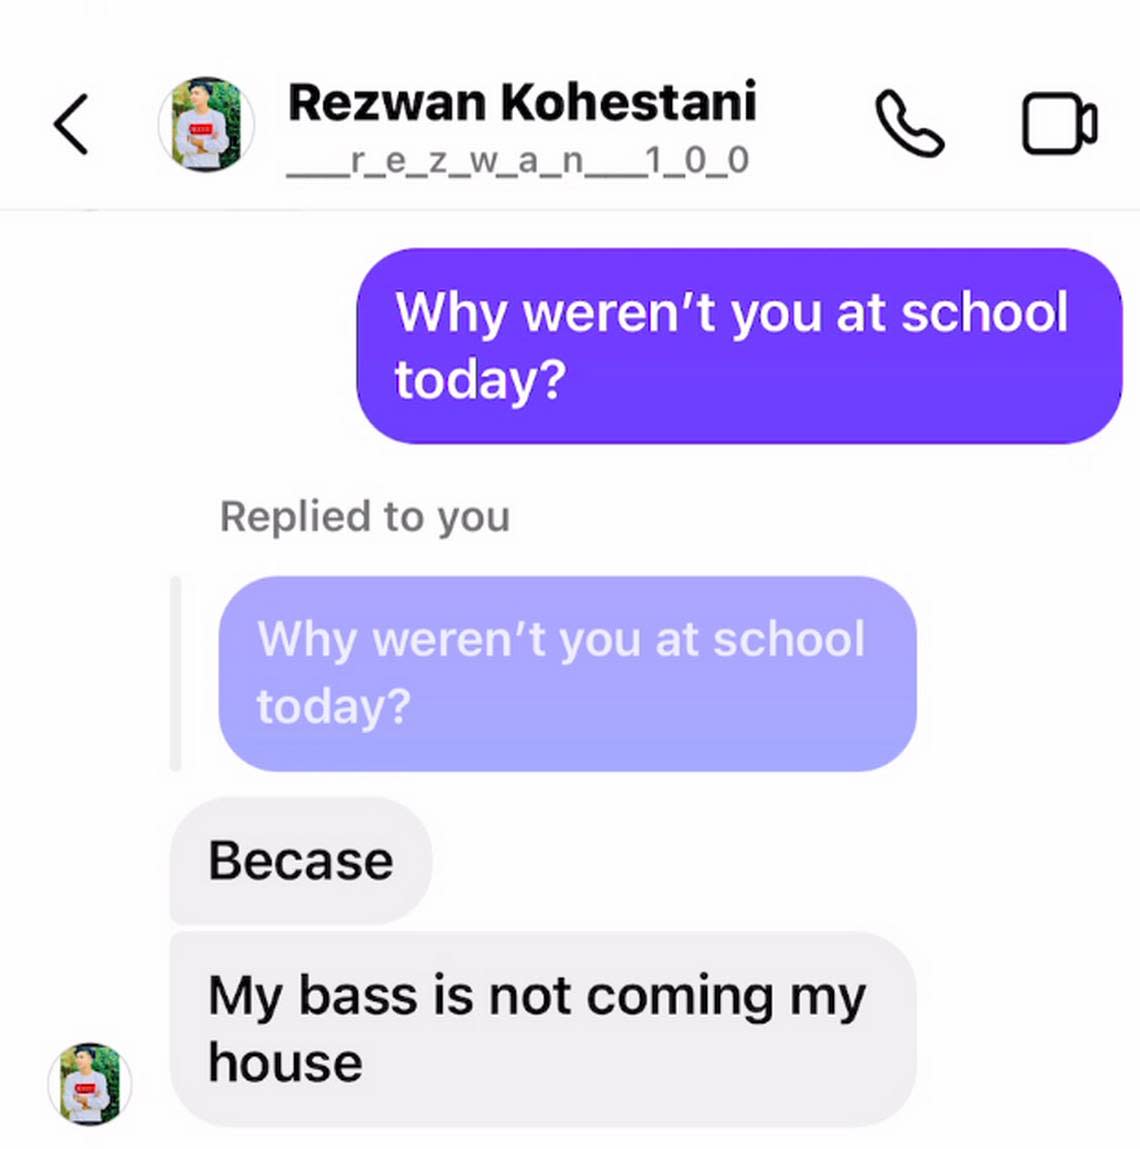 Instagram direct messages between Rezwan and a classmate